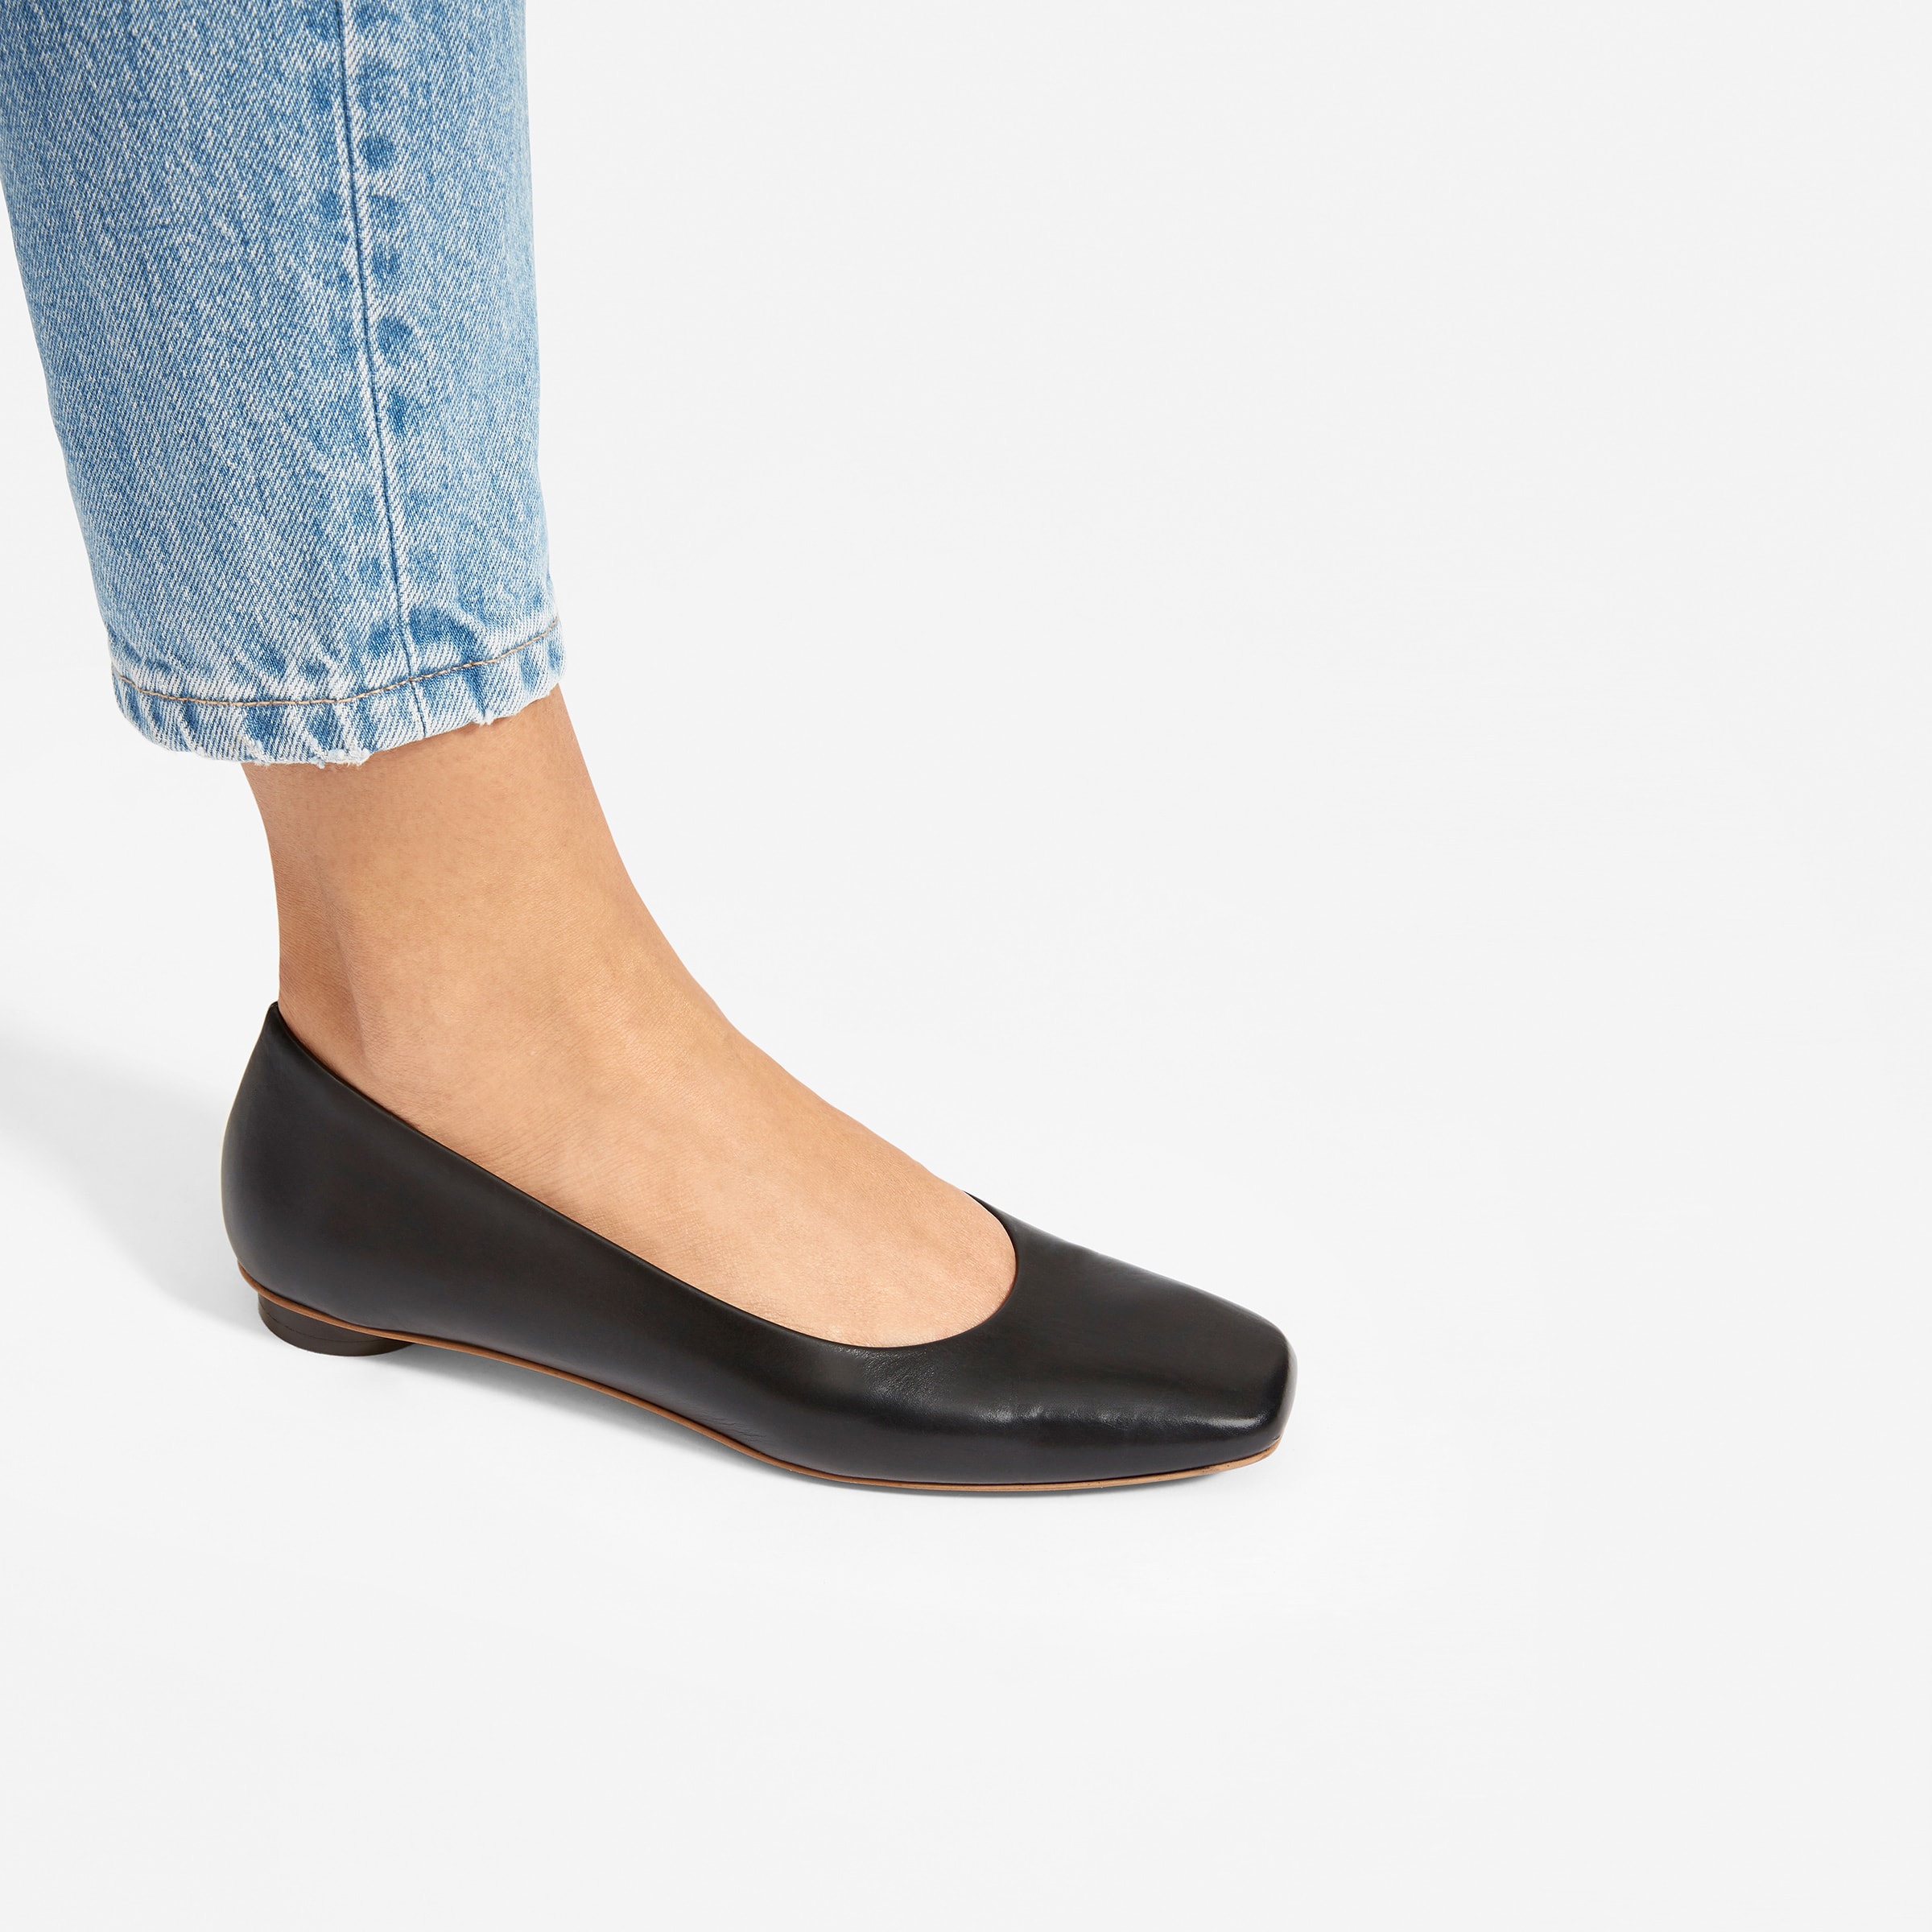 everlane square toe flat review